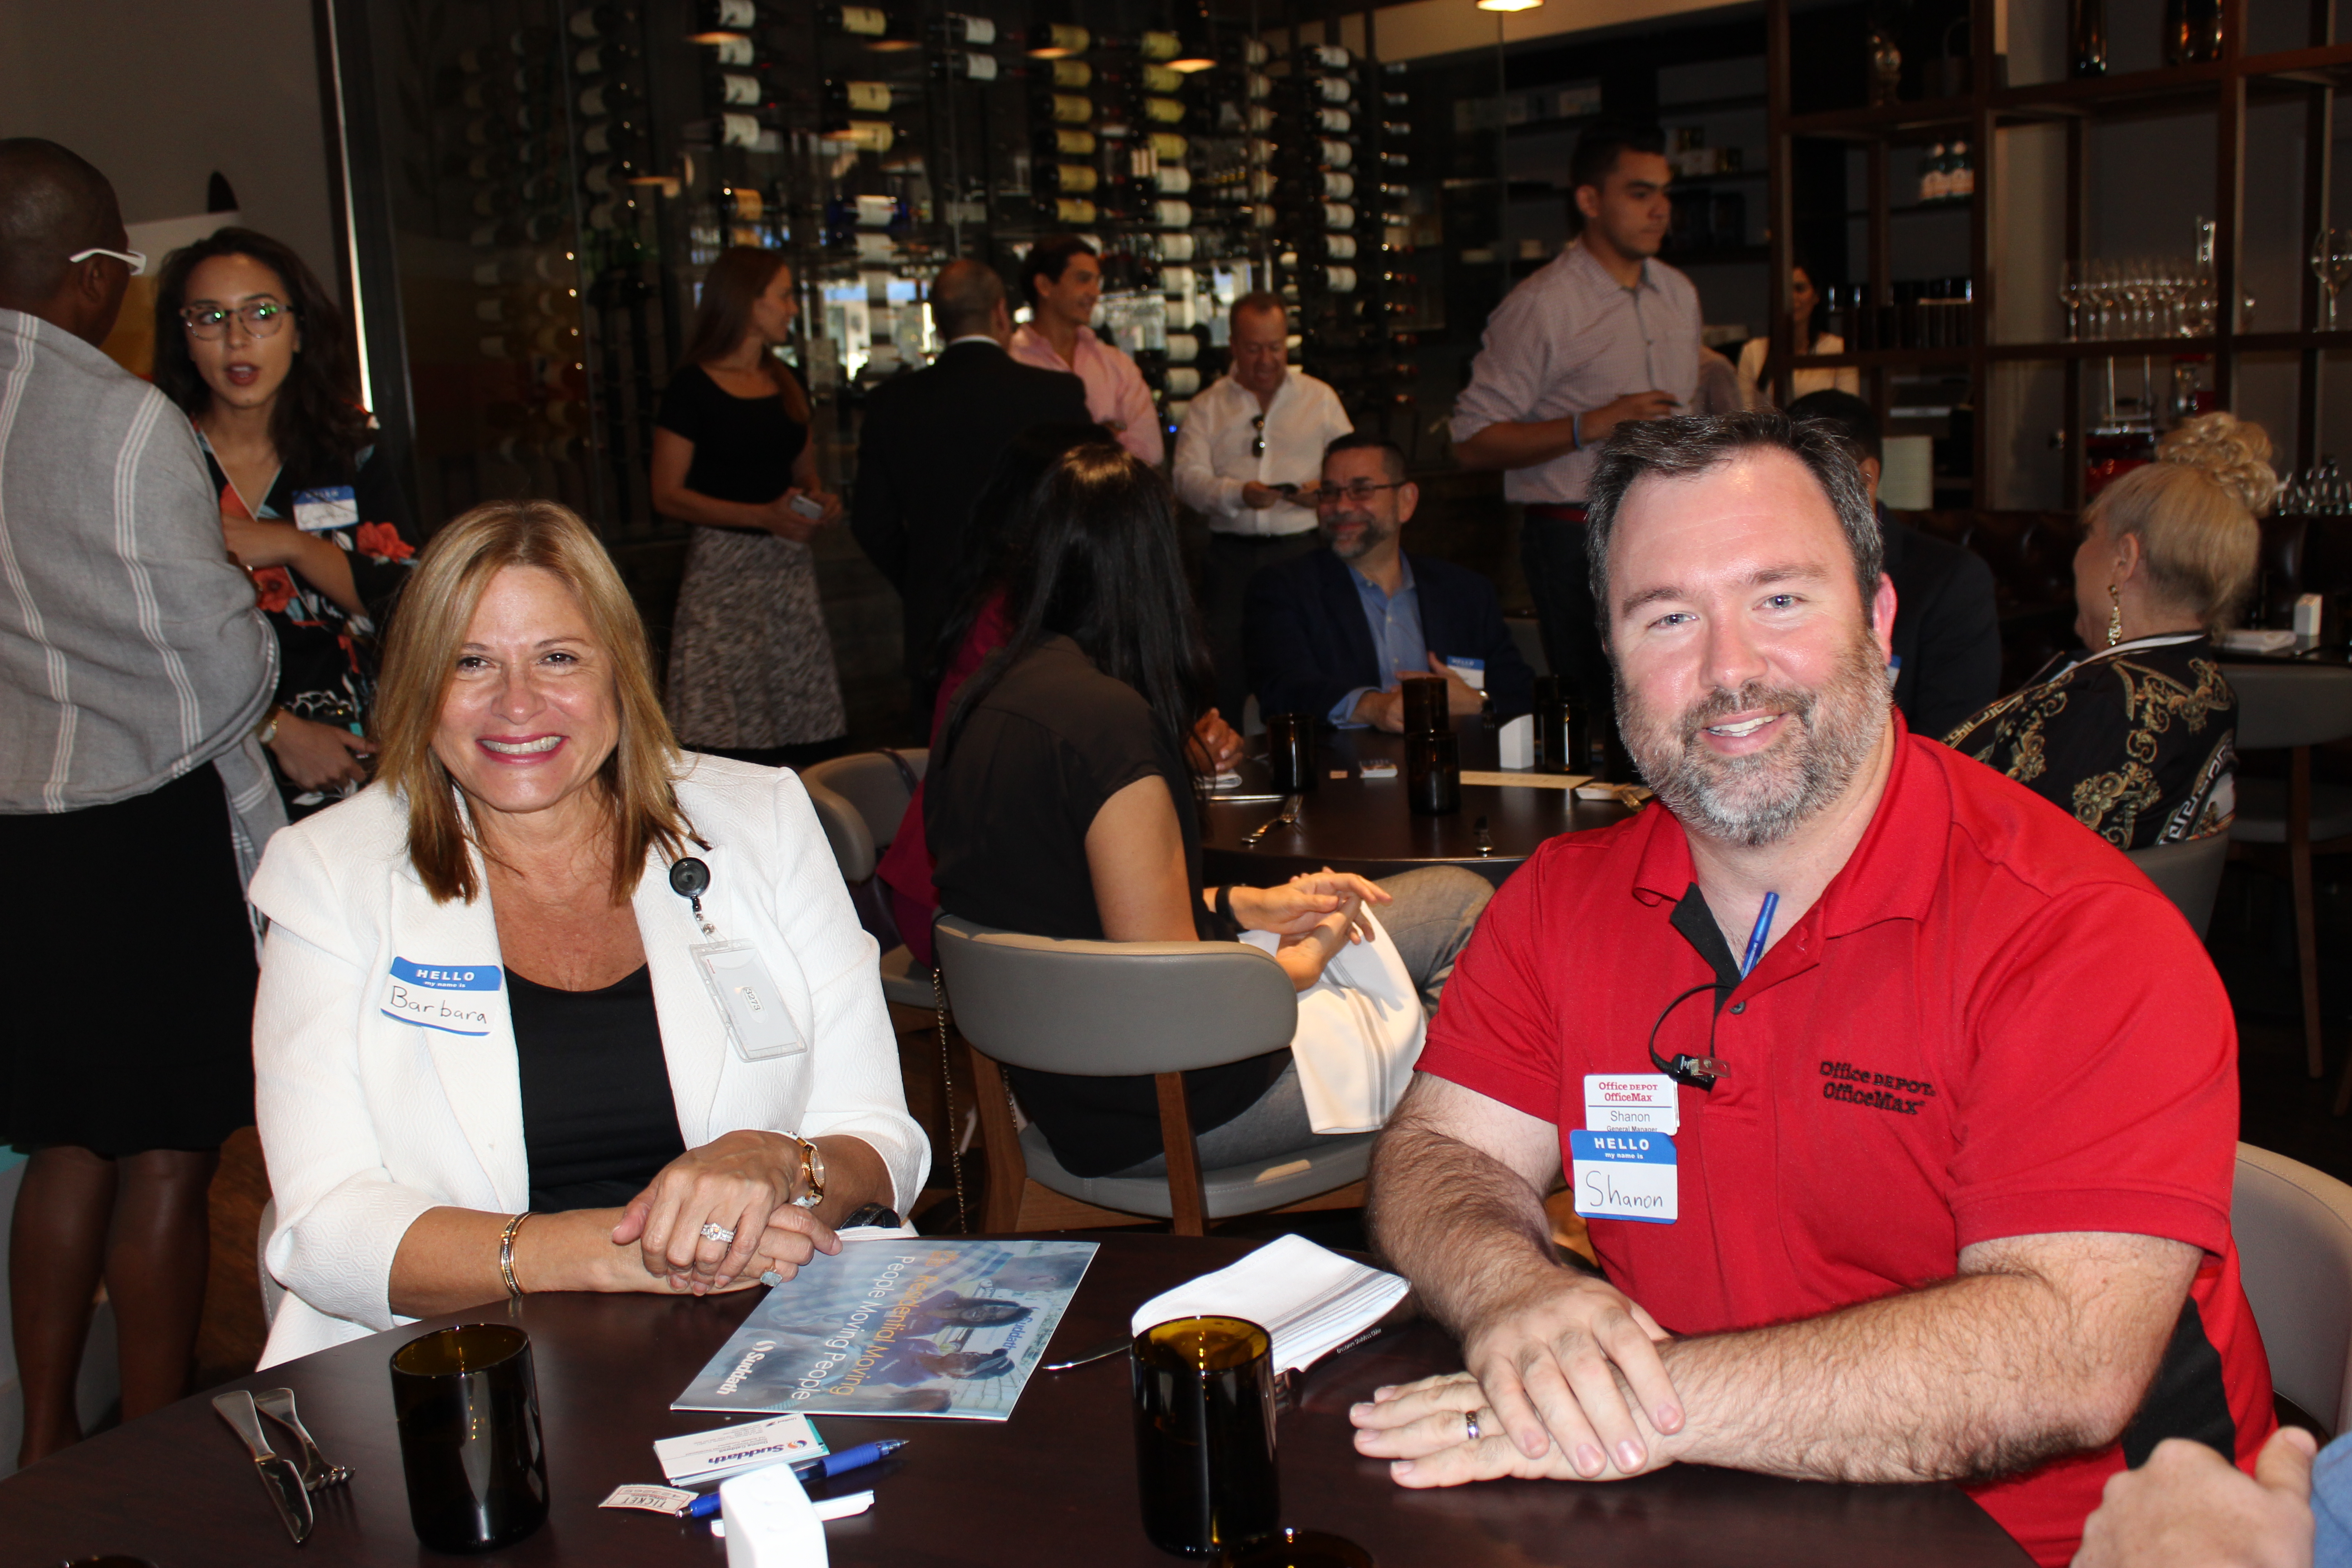 Barbara and Shanon in Gusto Ristobar Luncheon hosted by Doral Chamber of Commerce.